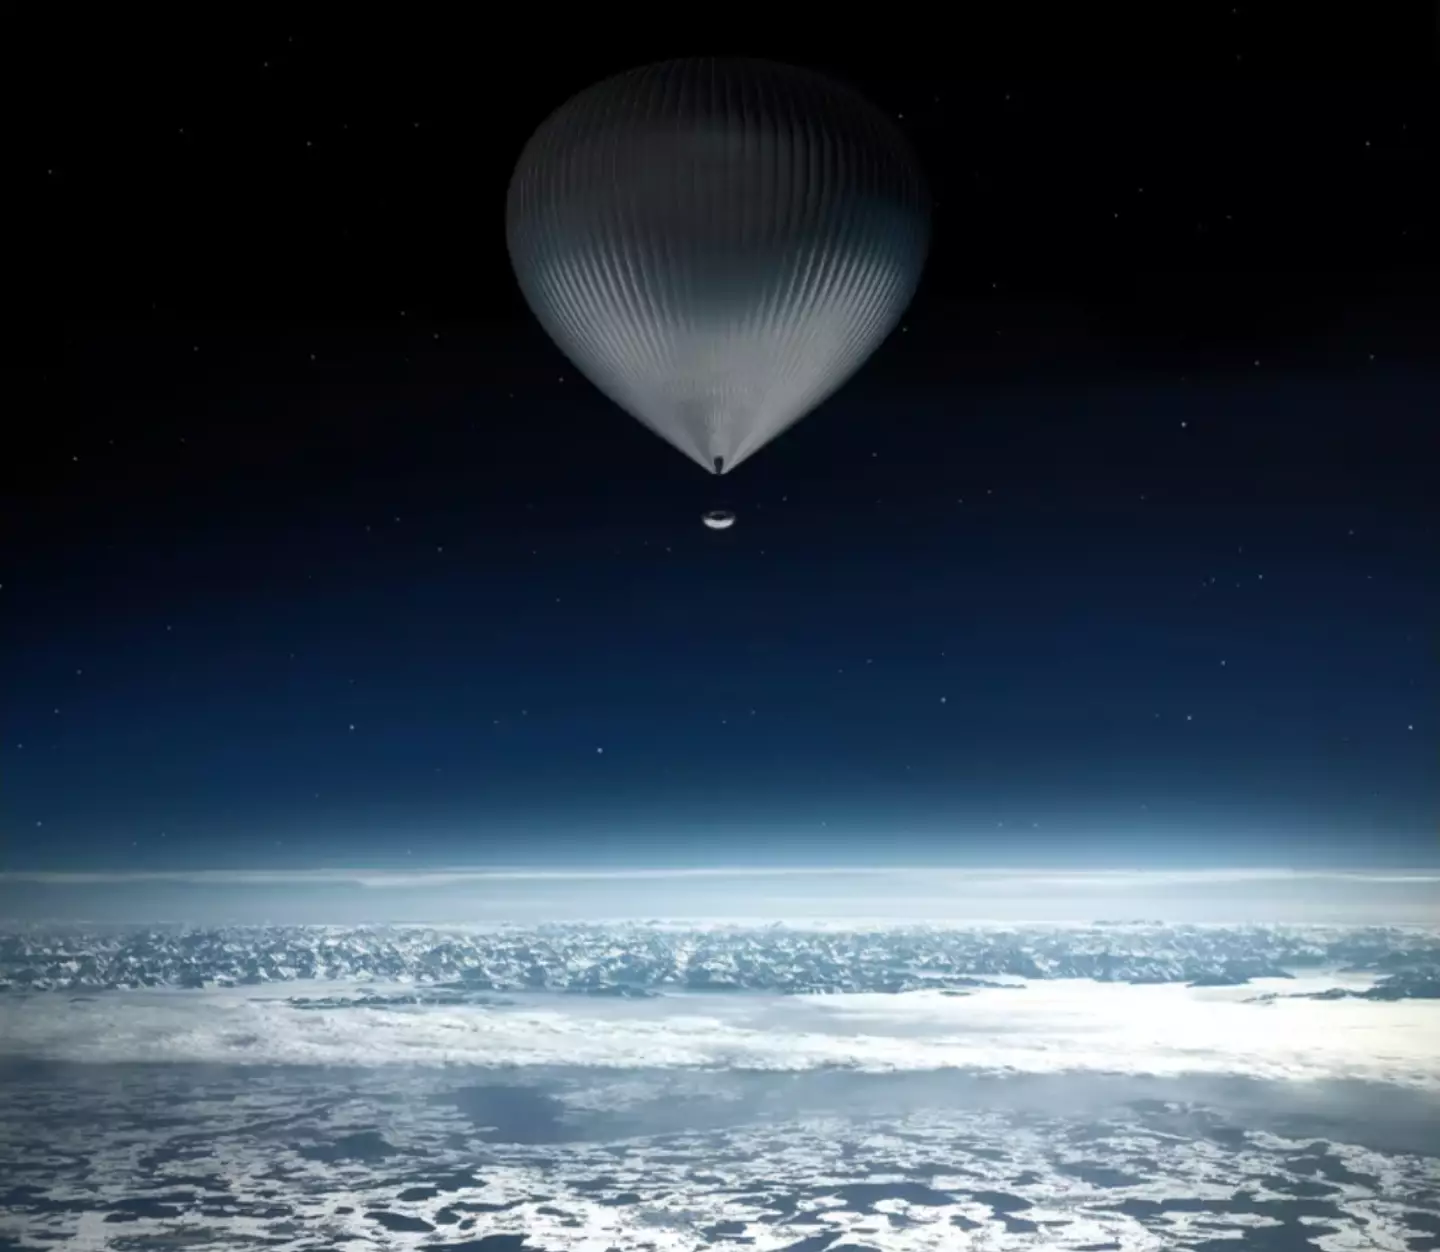 Zephalto says its balloon-suspended restaurant will rise 25 kilometers into the atmosphere.